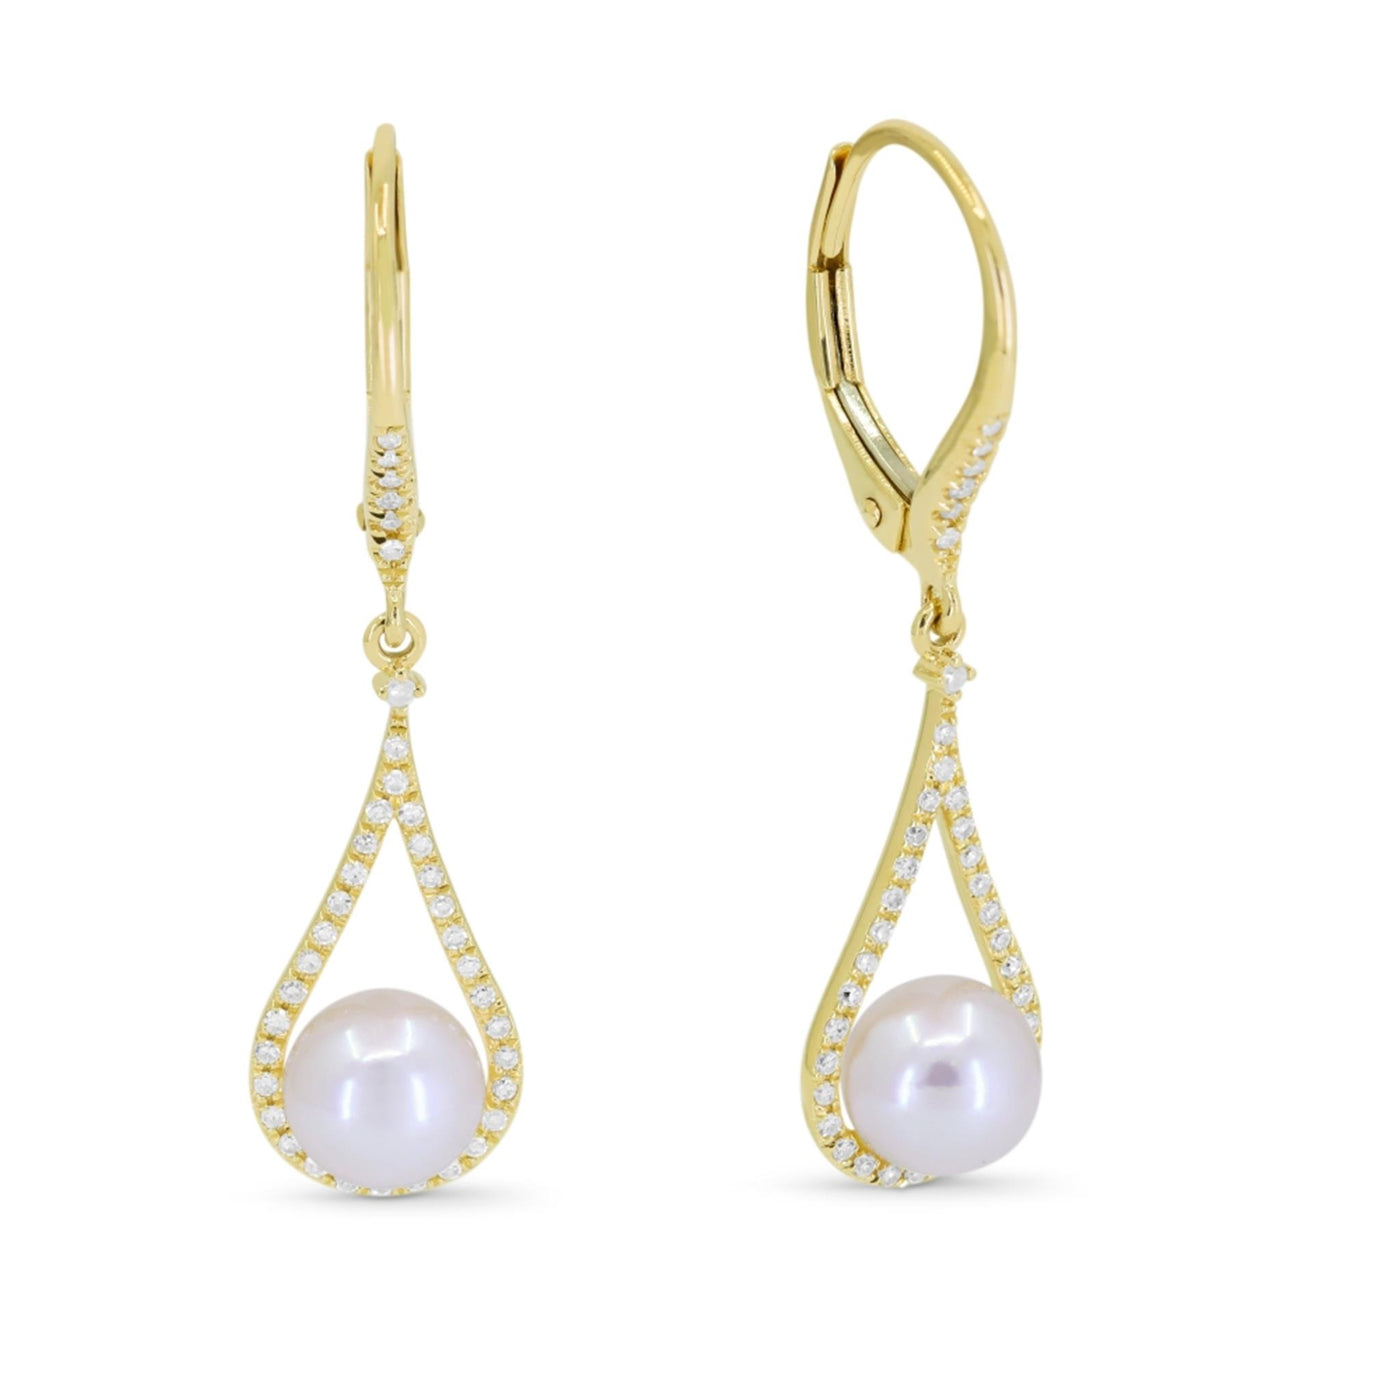 Madison L 14K Yellow Gold 0.17ctw Dangle Style Earrings Featuring Cultured Pearls and Diamonds